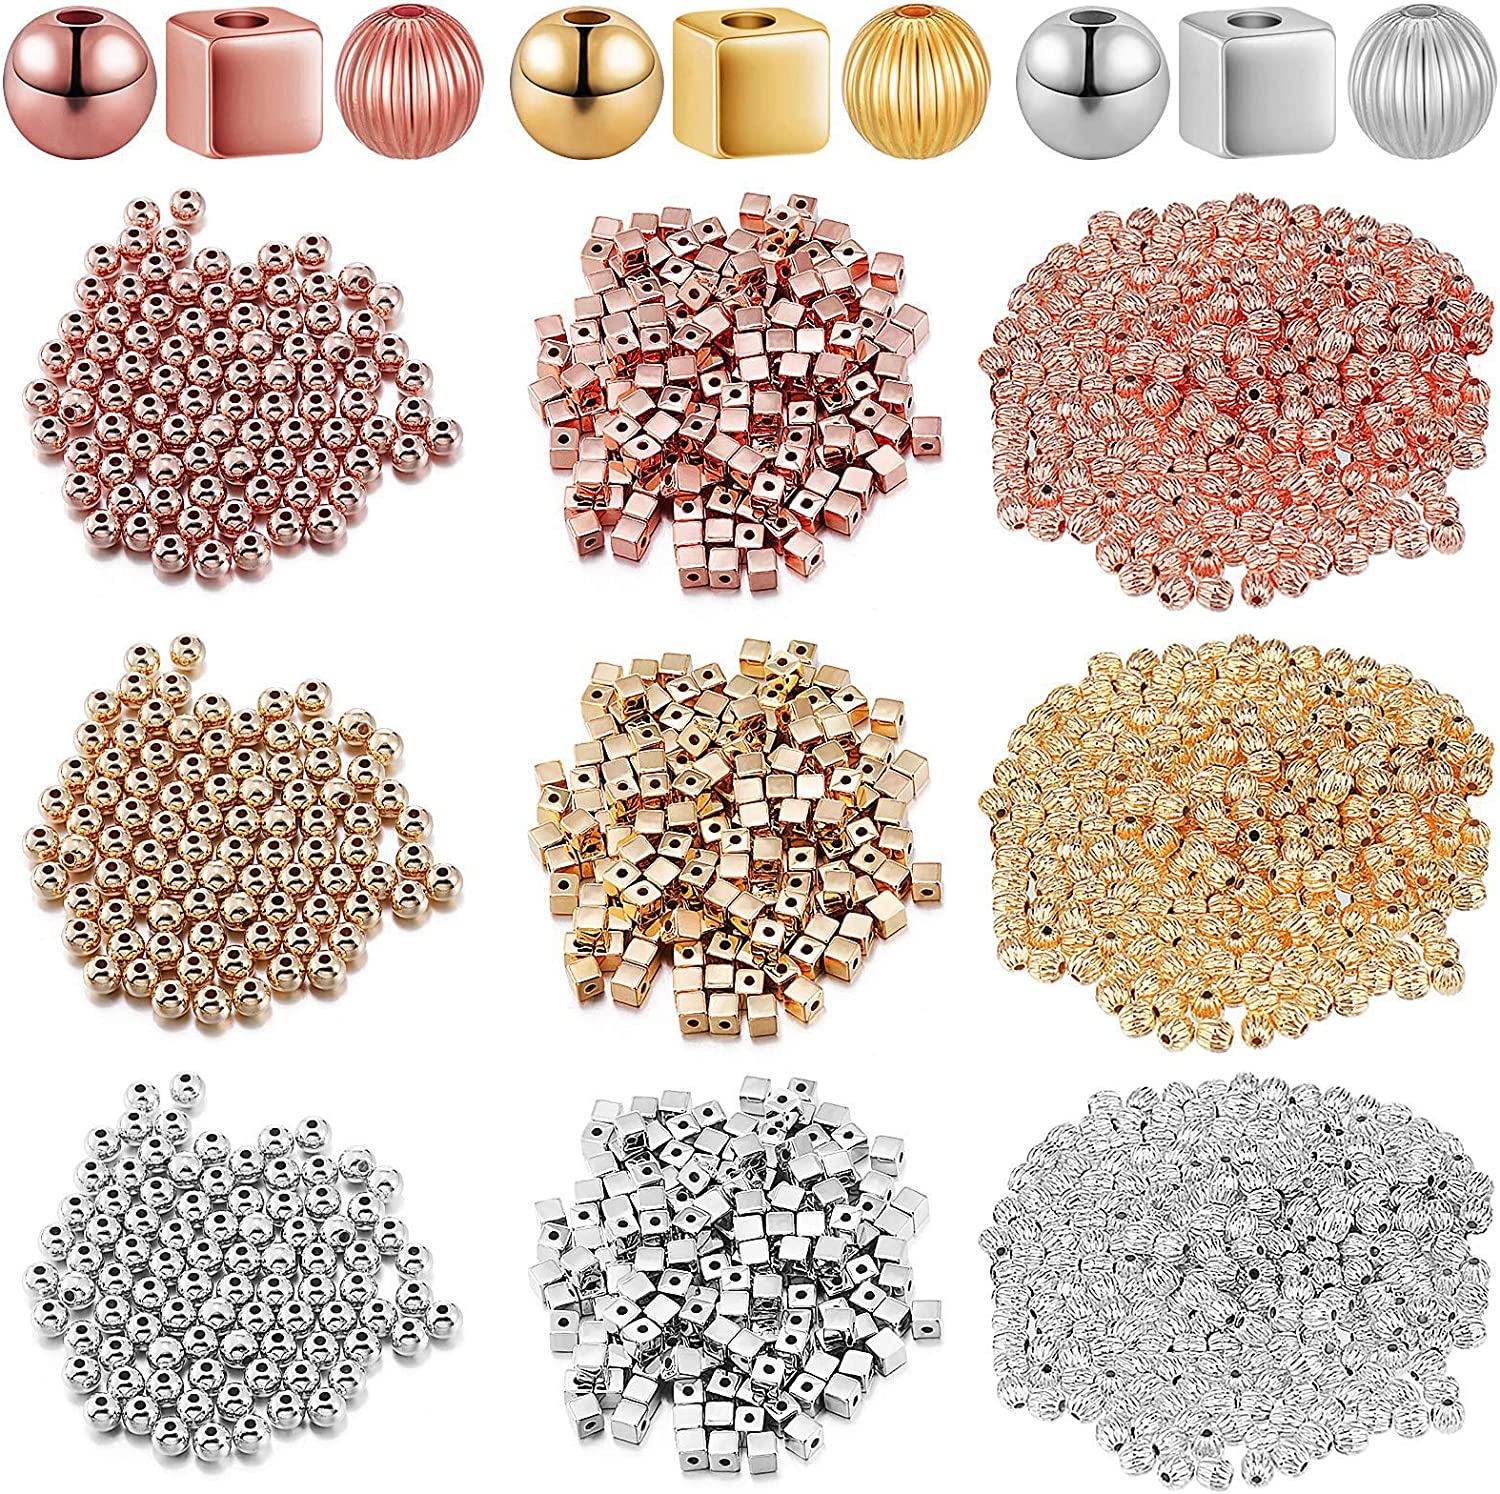 3000 Pieces Assorted Spacer Beads for Jewelry Making, Rose Gold Beads  Rondelle Square Beads Silver and Gold Beads Charms for DIY Crafts Making